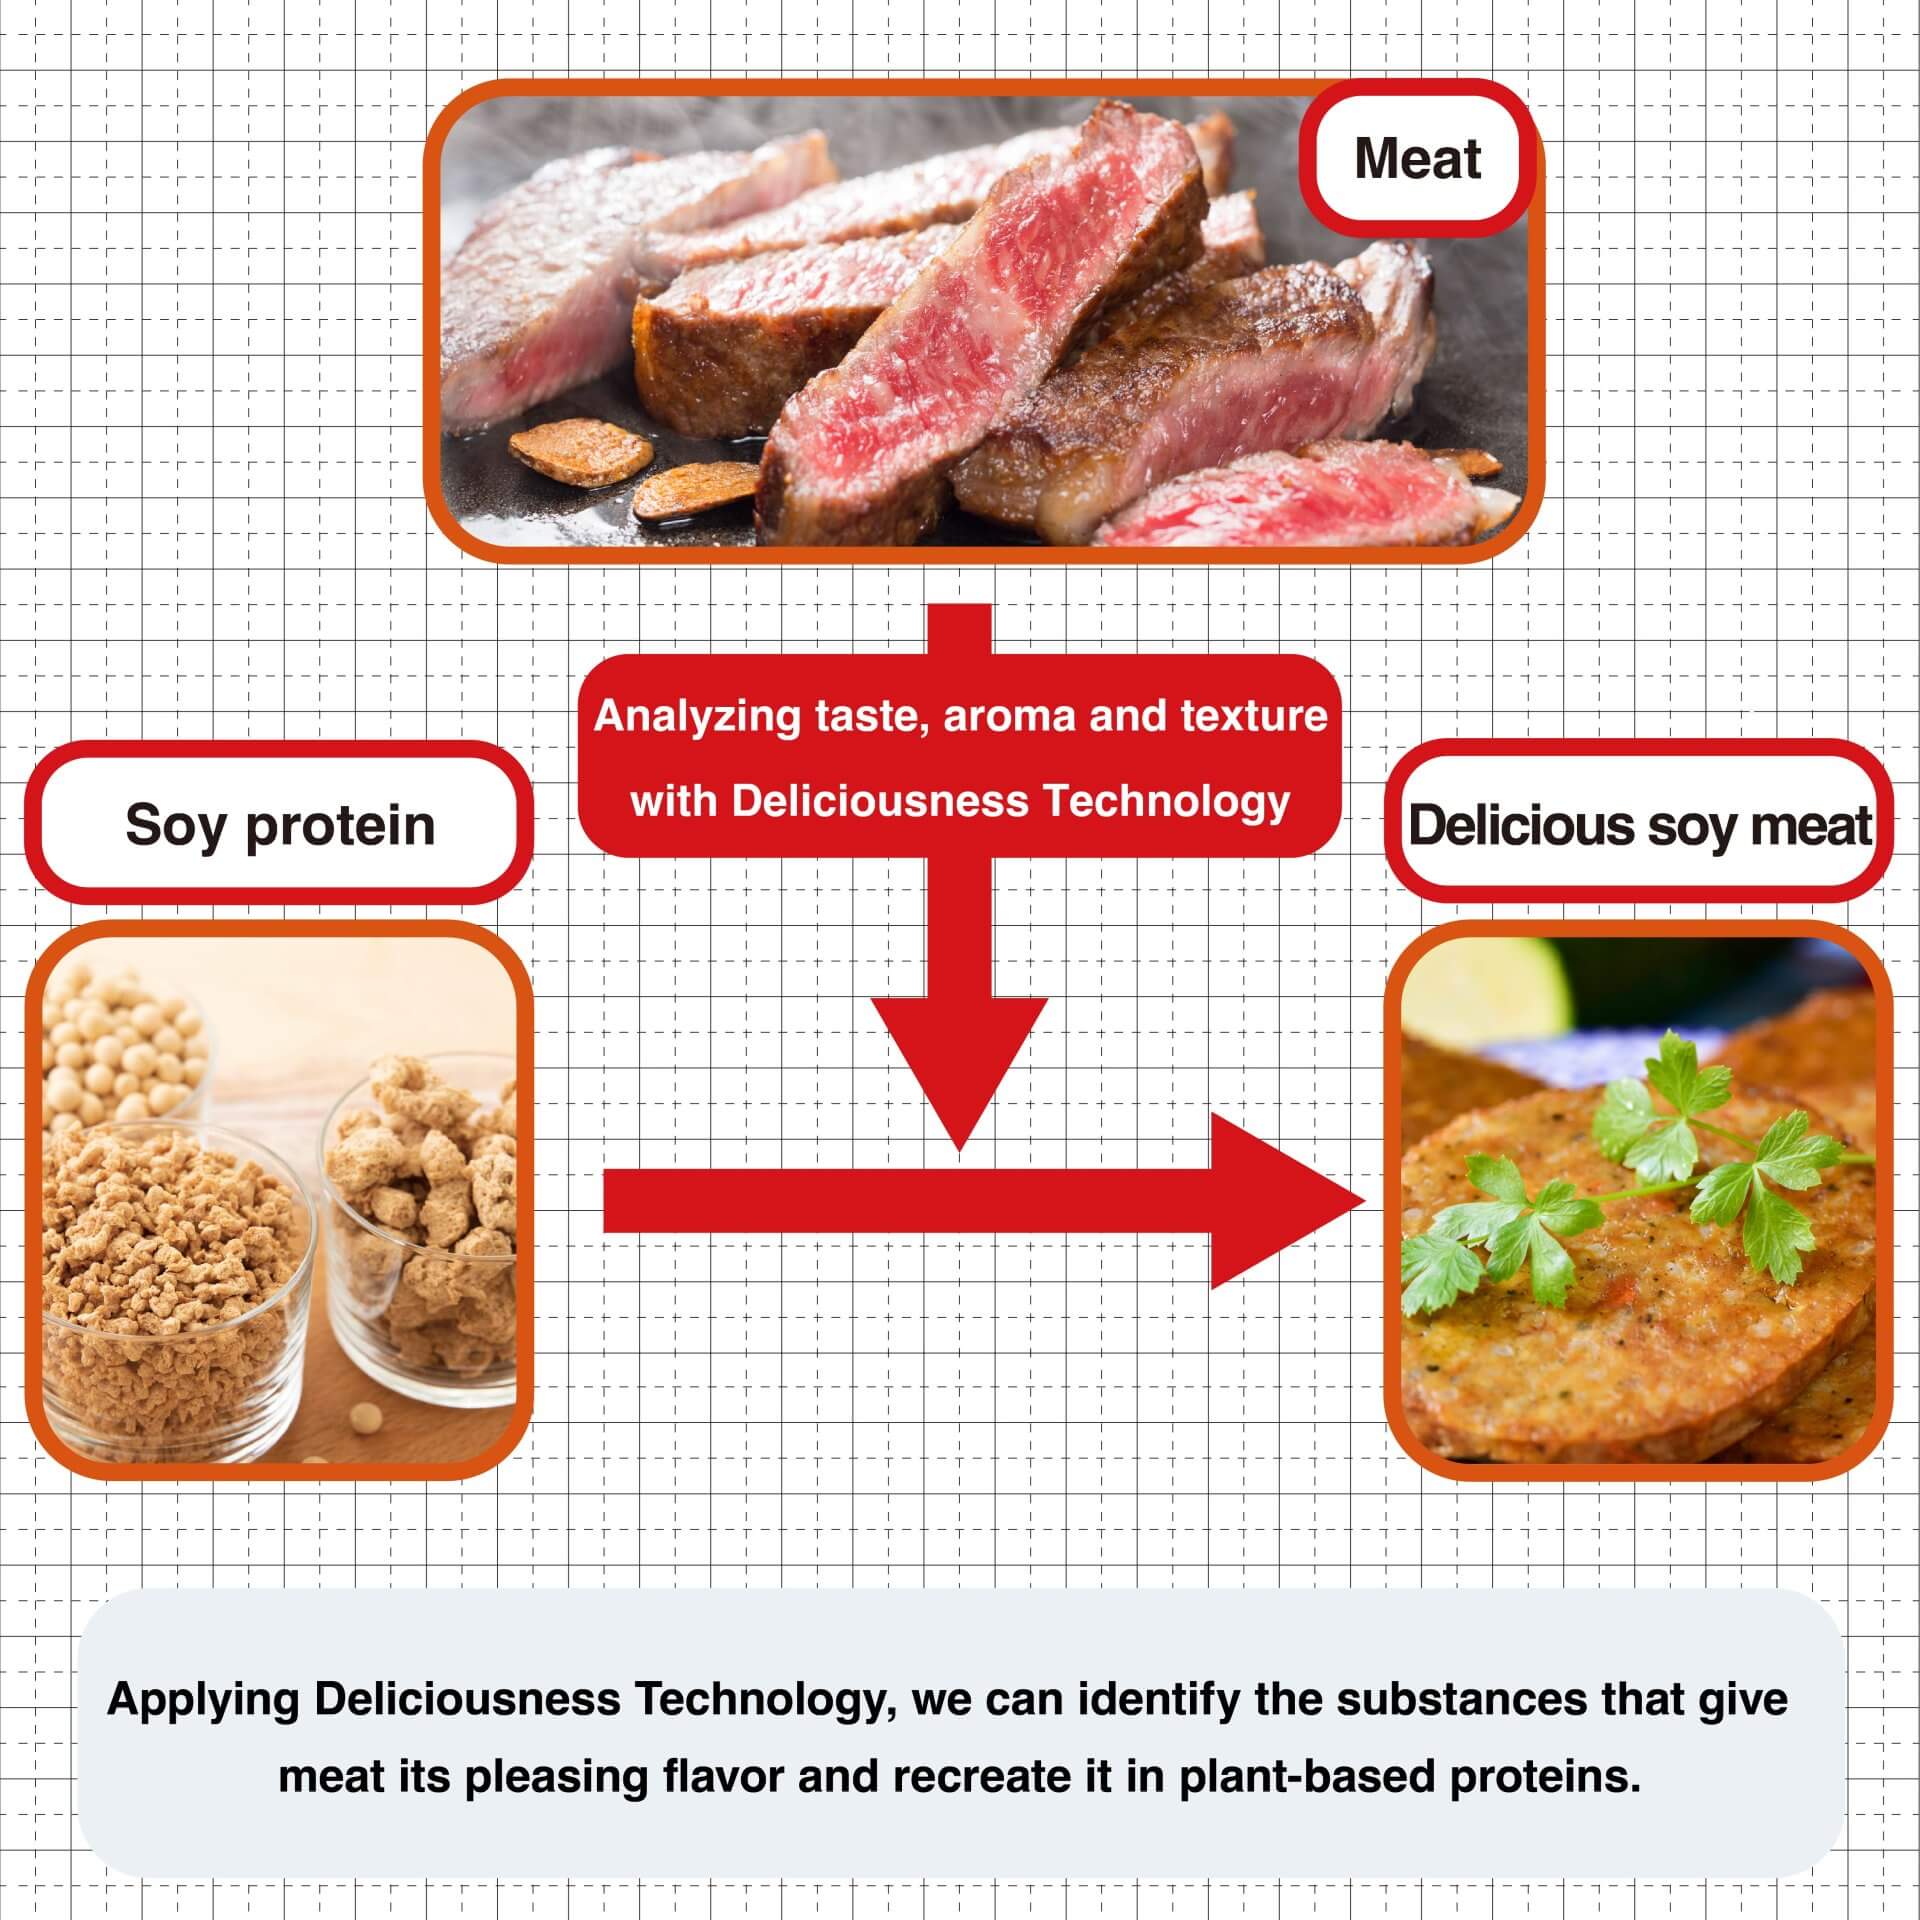 Applying Deliciousness Technology, we can identify the substances that give meat its pleasing flavor and recreate it in plant-based proteins.